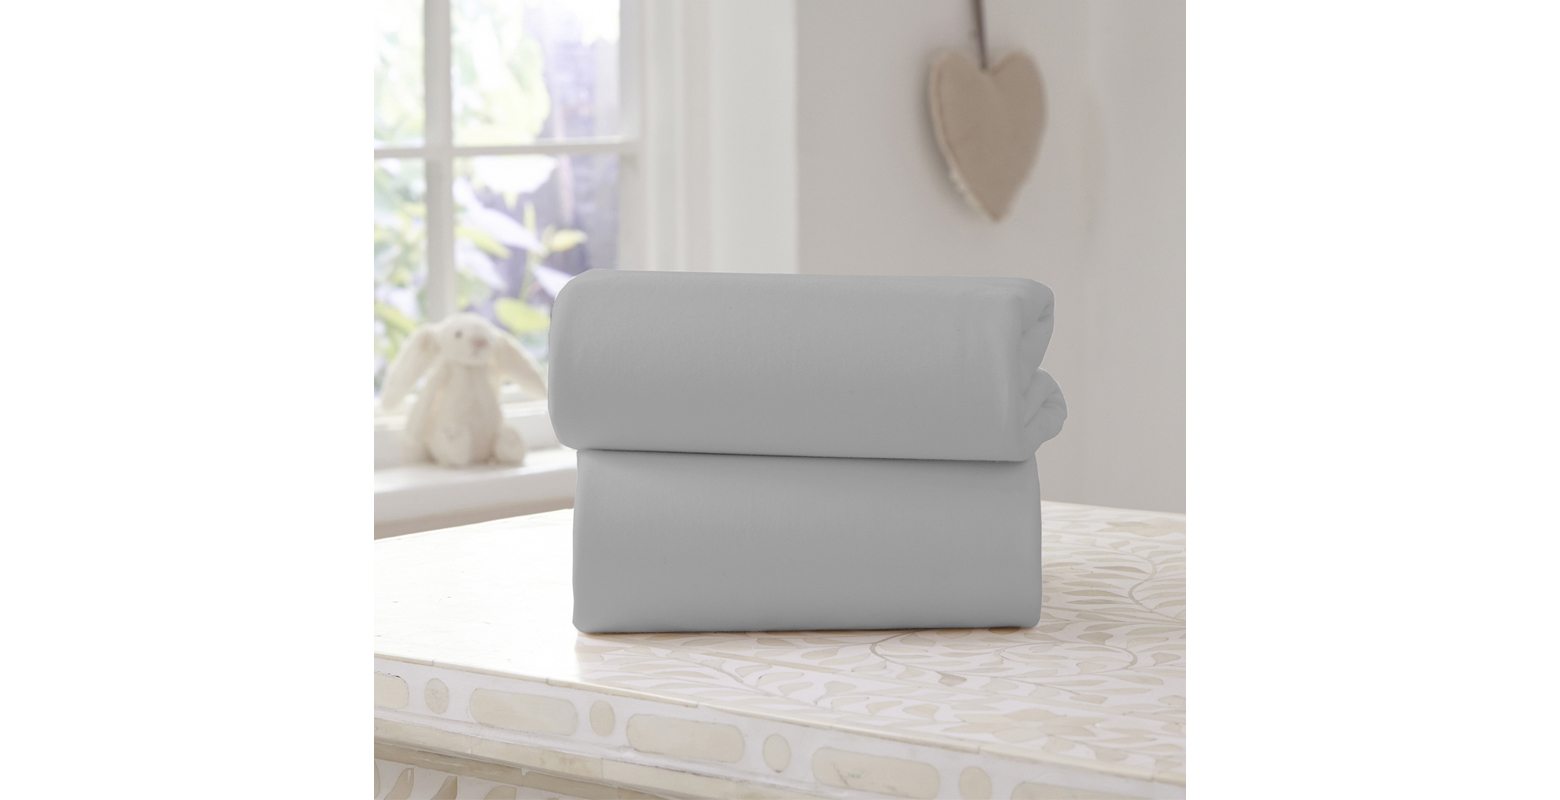 Clair De Lune Fitted Sheet Twin Pack Grey Crib